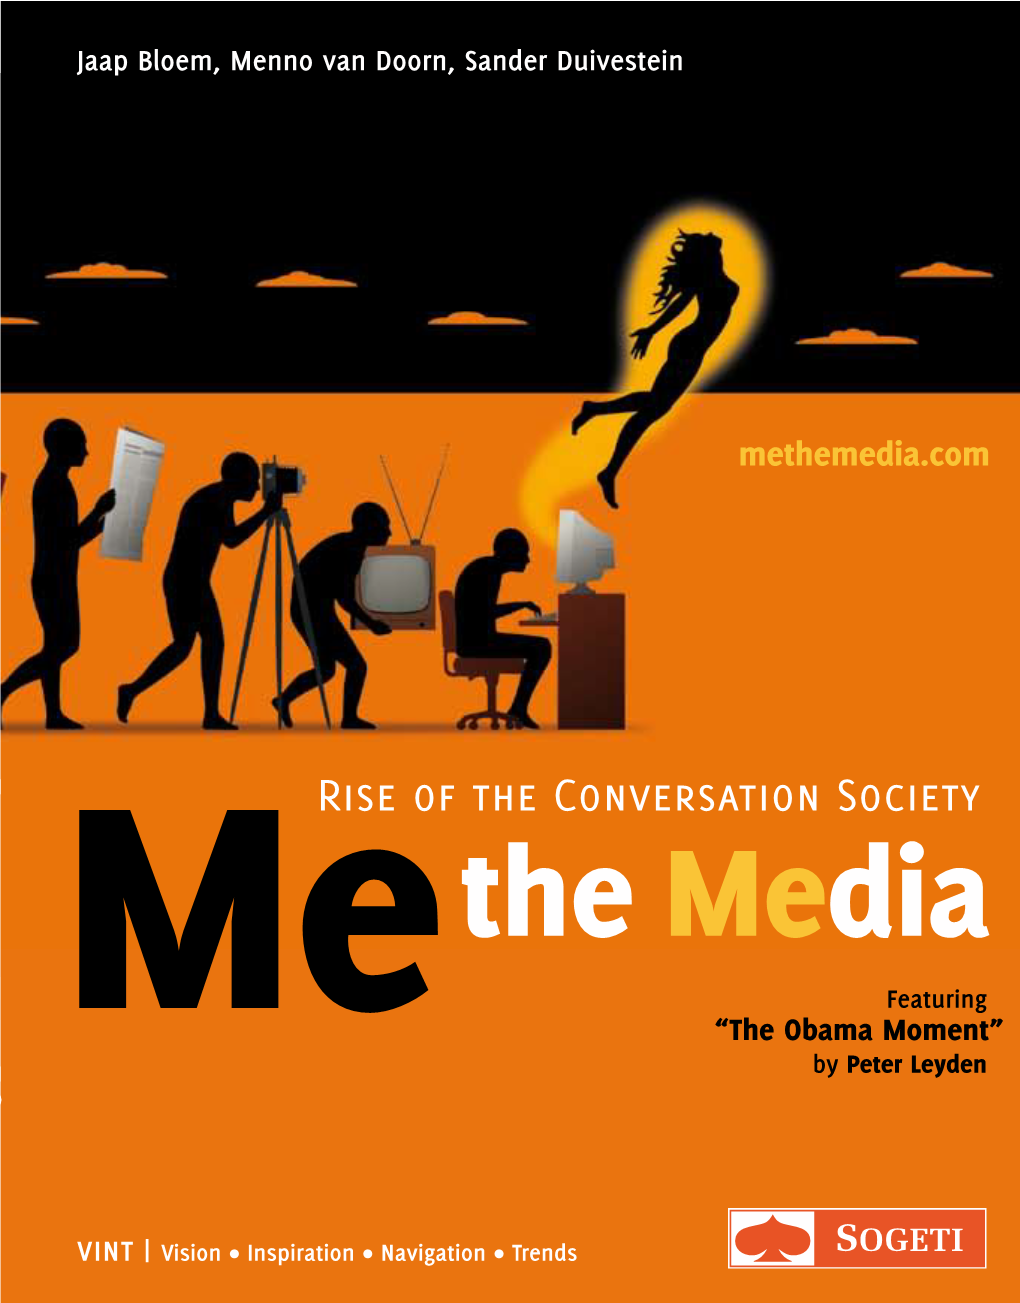 The Media “Pop” with Augmented Reality Tech Past, Present and Future of the Third Media Revolution About the Authors